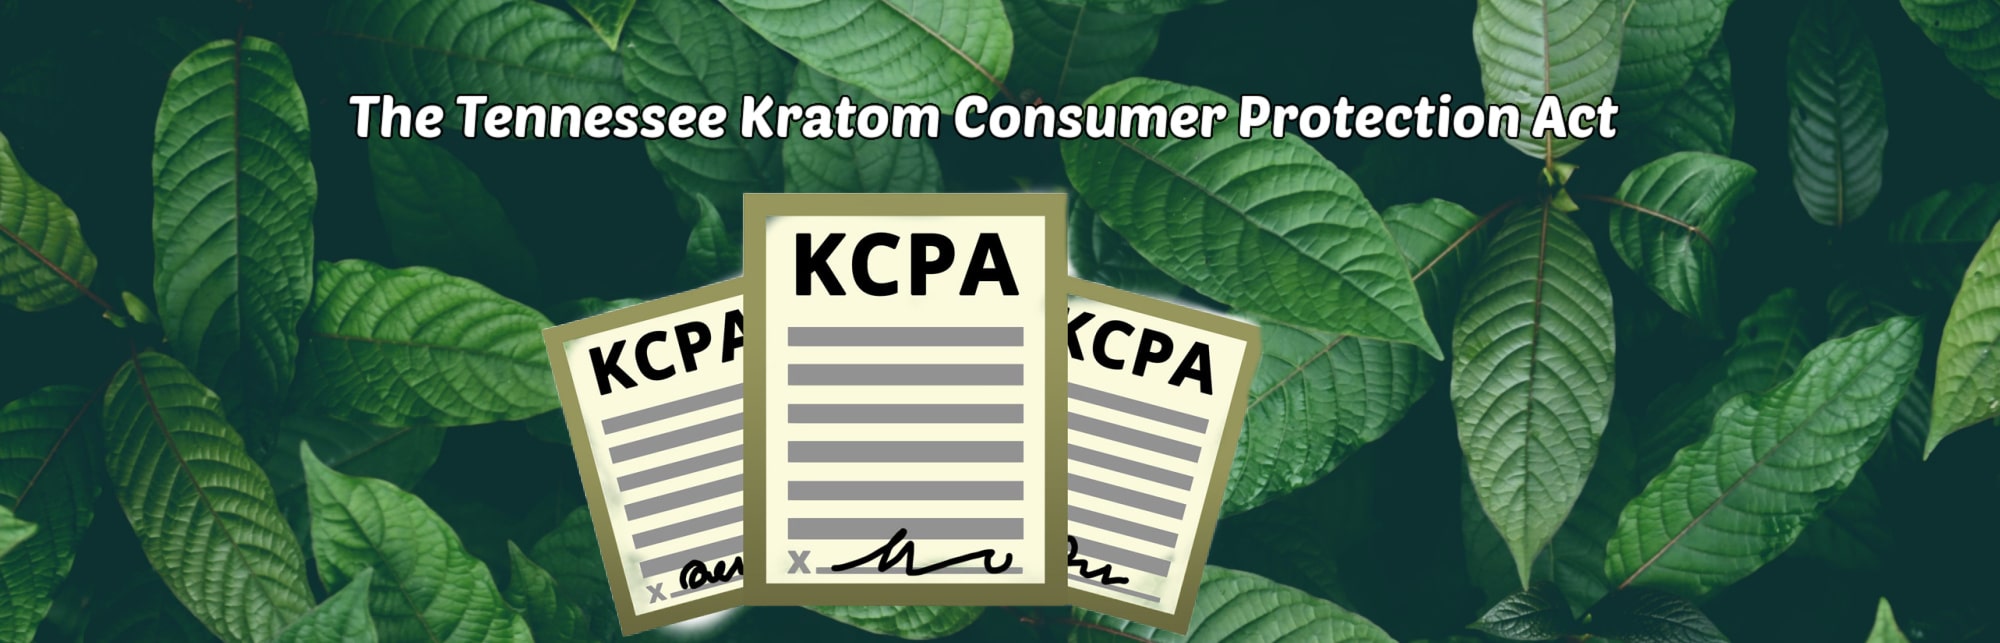 image of the tennessee kratom consumer protection act